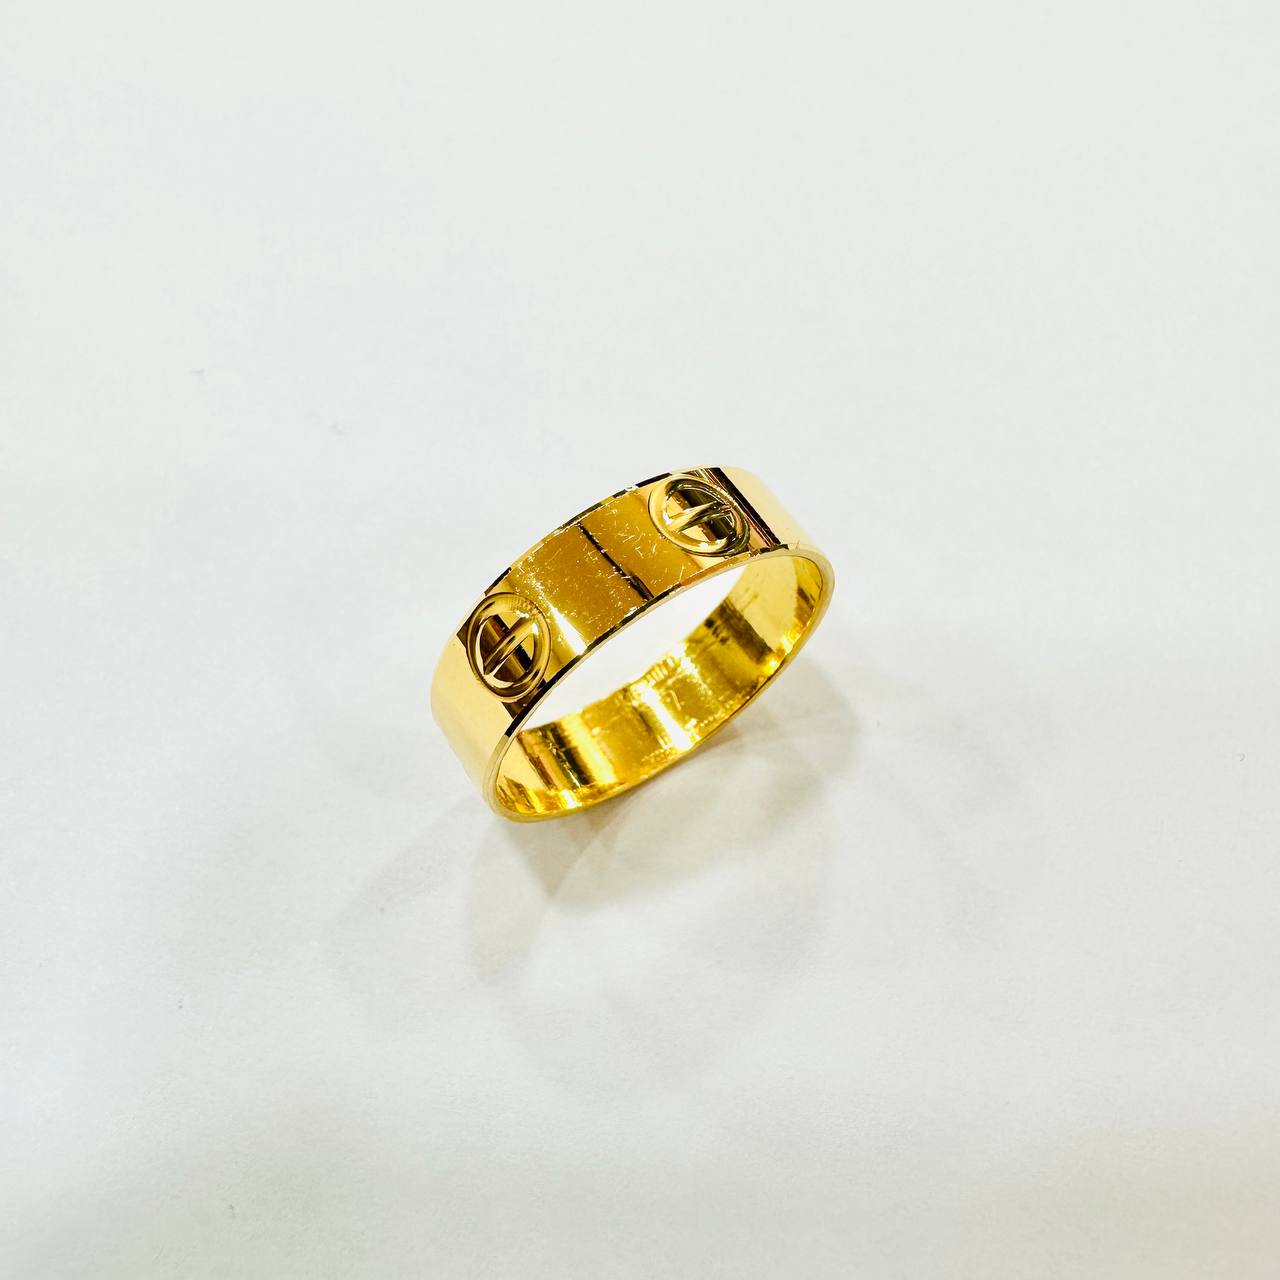 22k Singapore Yellow Gold ( 916 Chinese Pure Gold ) Ring ( No SWAP) Fix  Price, Women's Fashion, Jewelry & Organizers, Rings on Carousell